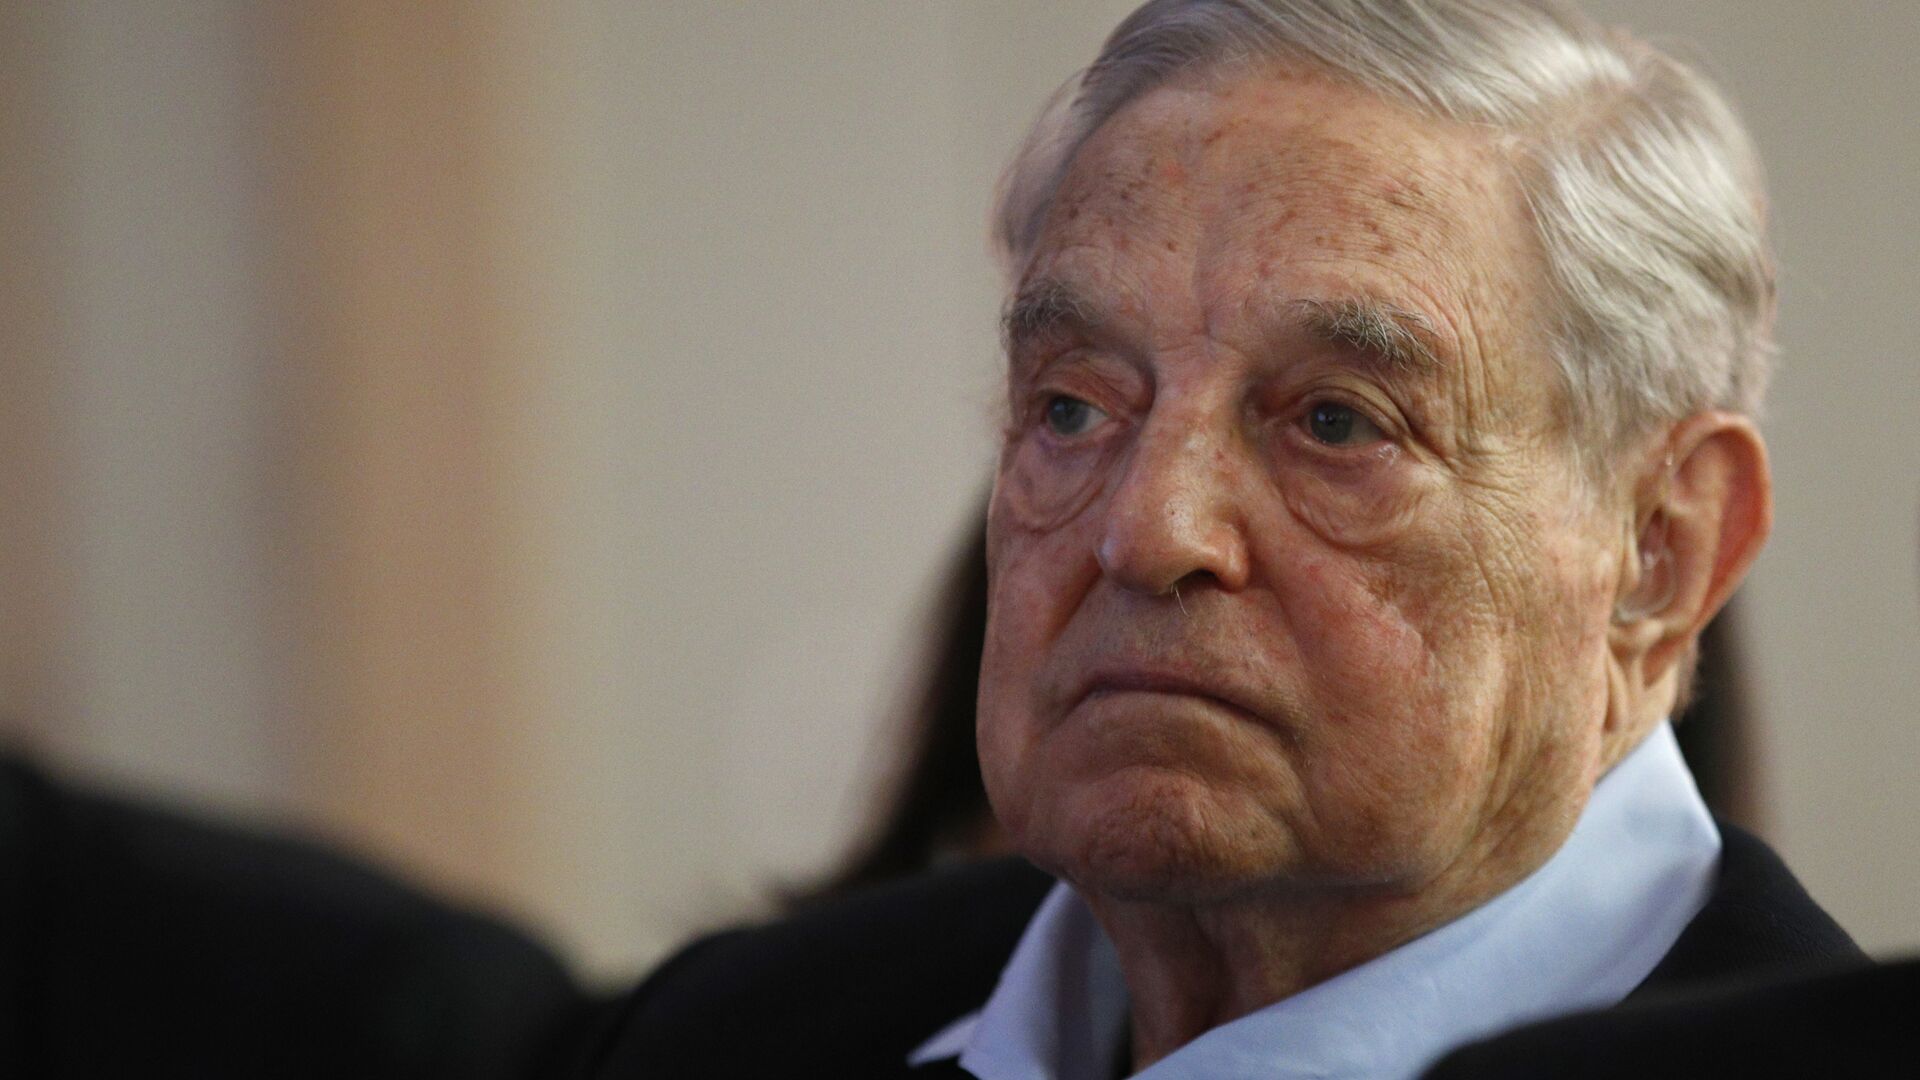 George Soros, Founder and Chairman of the Open Society Foundations listens to the conference after his speech entitled How to save the European Union as he attends the European Council On Foreign Relations Annual Council Meeting in Paris, Tuesday, May 29, 2018 - Sputnik International, 1920, 30.04.2021